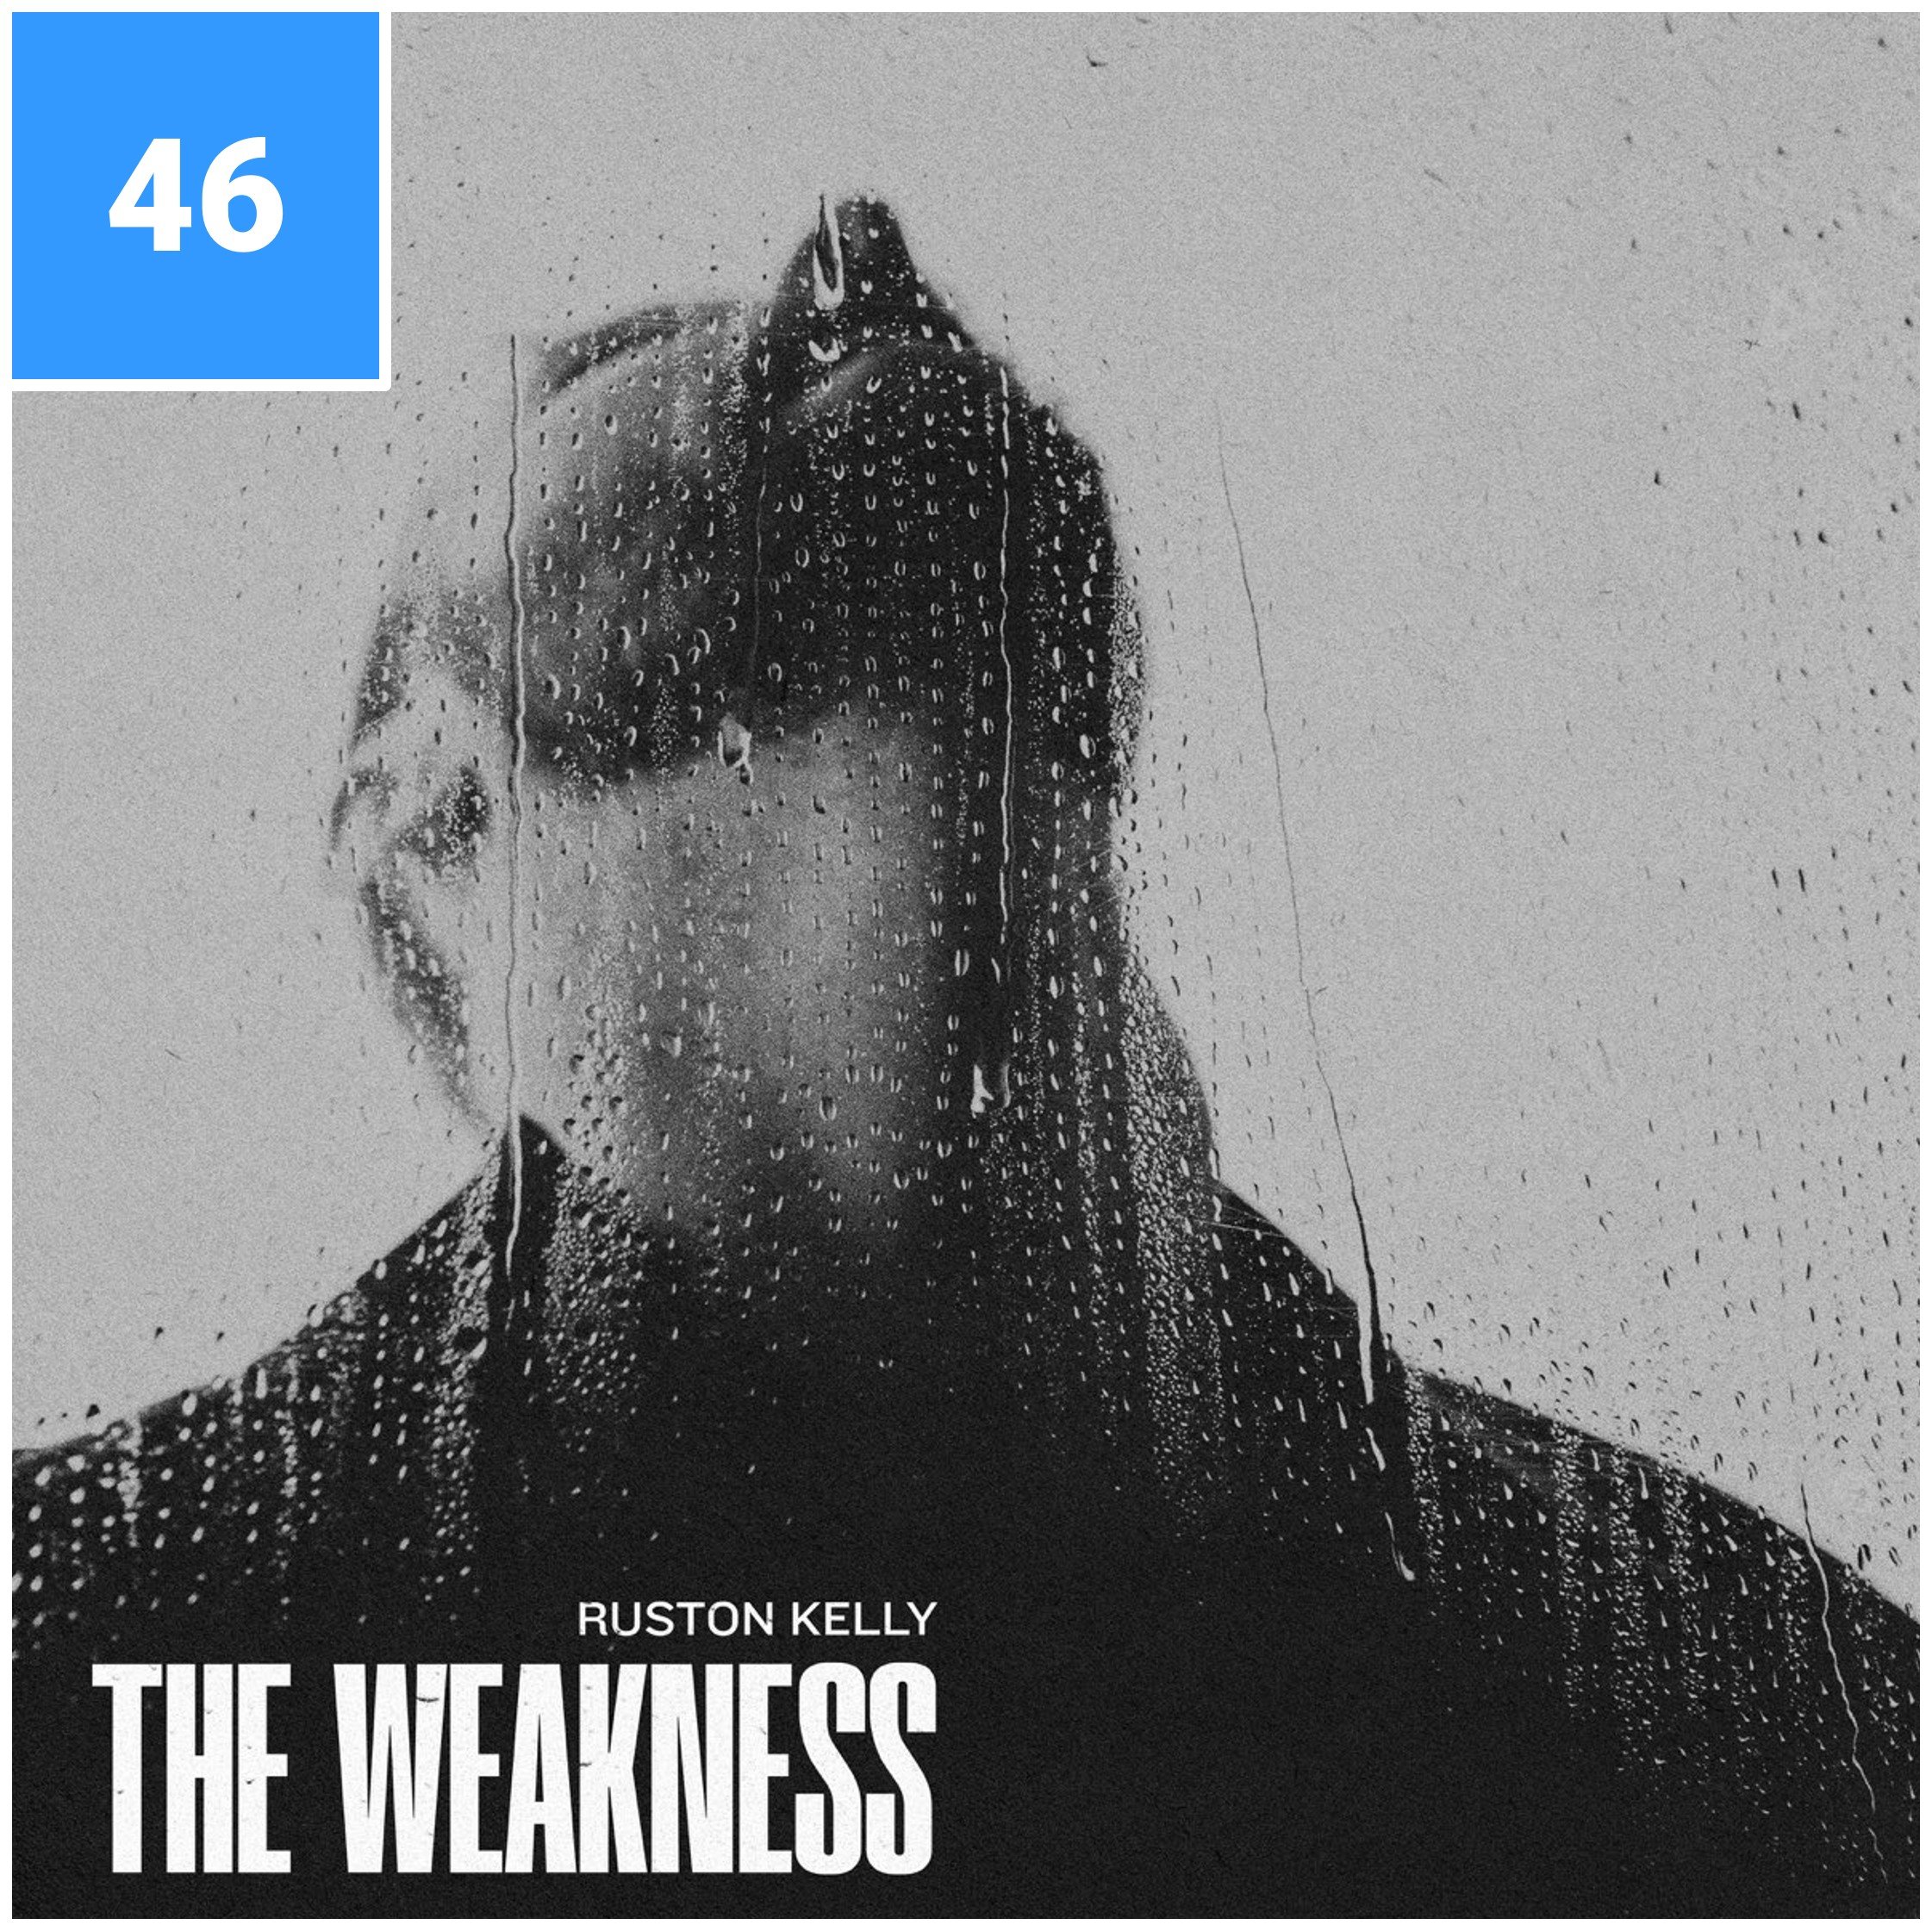 Albumism_46_RustonKelly_TheWeakness_Square.jpg